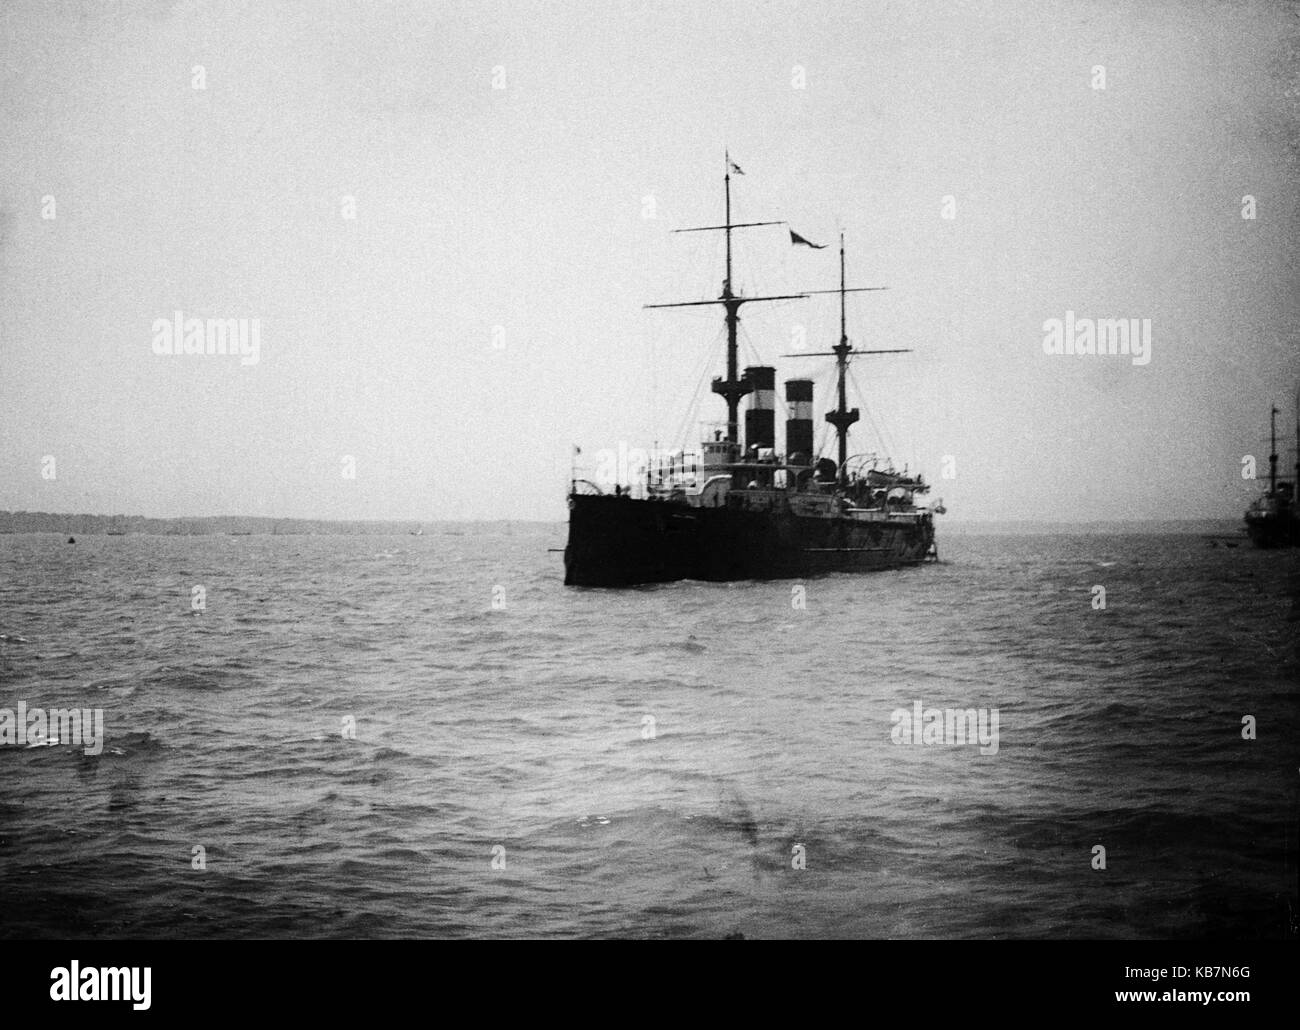 AJAXNETPHOTO. 1903. PORTSMOUTH, ENGLAND. - JAPAN WARSHIP VISITOR - UNKNOWN BATTLE CRUISER OF IMPERIAL JAPANESE NAVY ENTERING HARBOUR. PHOTOGRAPHER:UNKNOWN © DIGITAL IMAGE COPYRIGHT AJAX VINTAGE PICTURE LIBRARY SOURCE: AJAX VINTAGE PICTURE LIBRARY COLLECTION REF:AVL 0973 Stock Photo